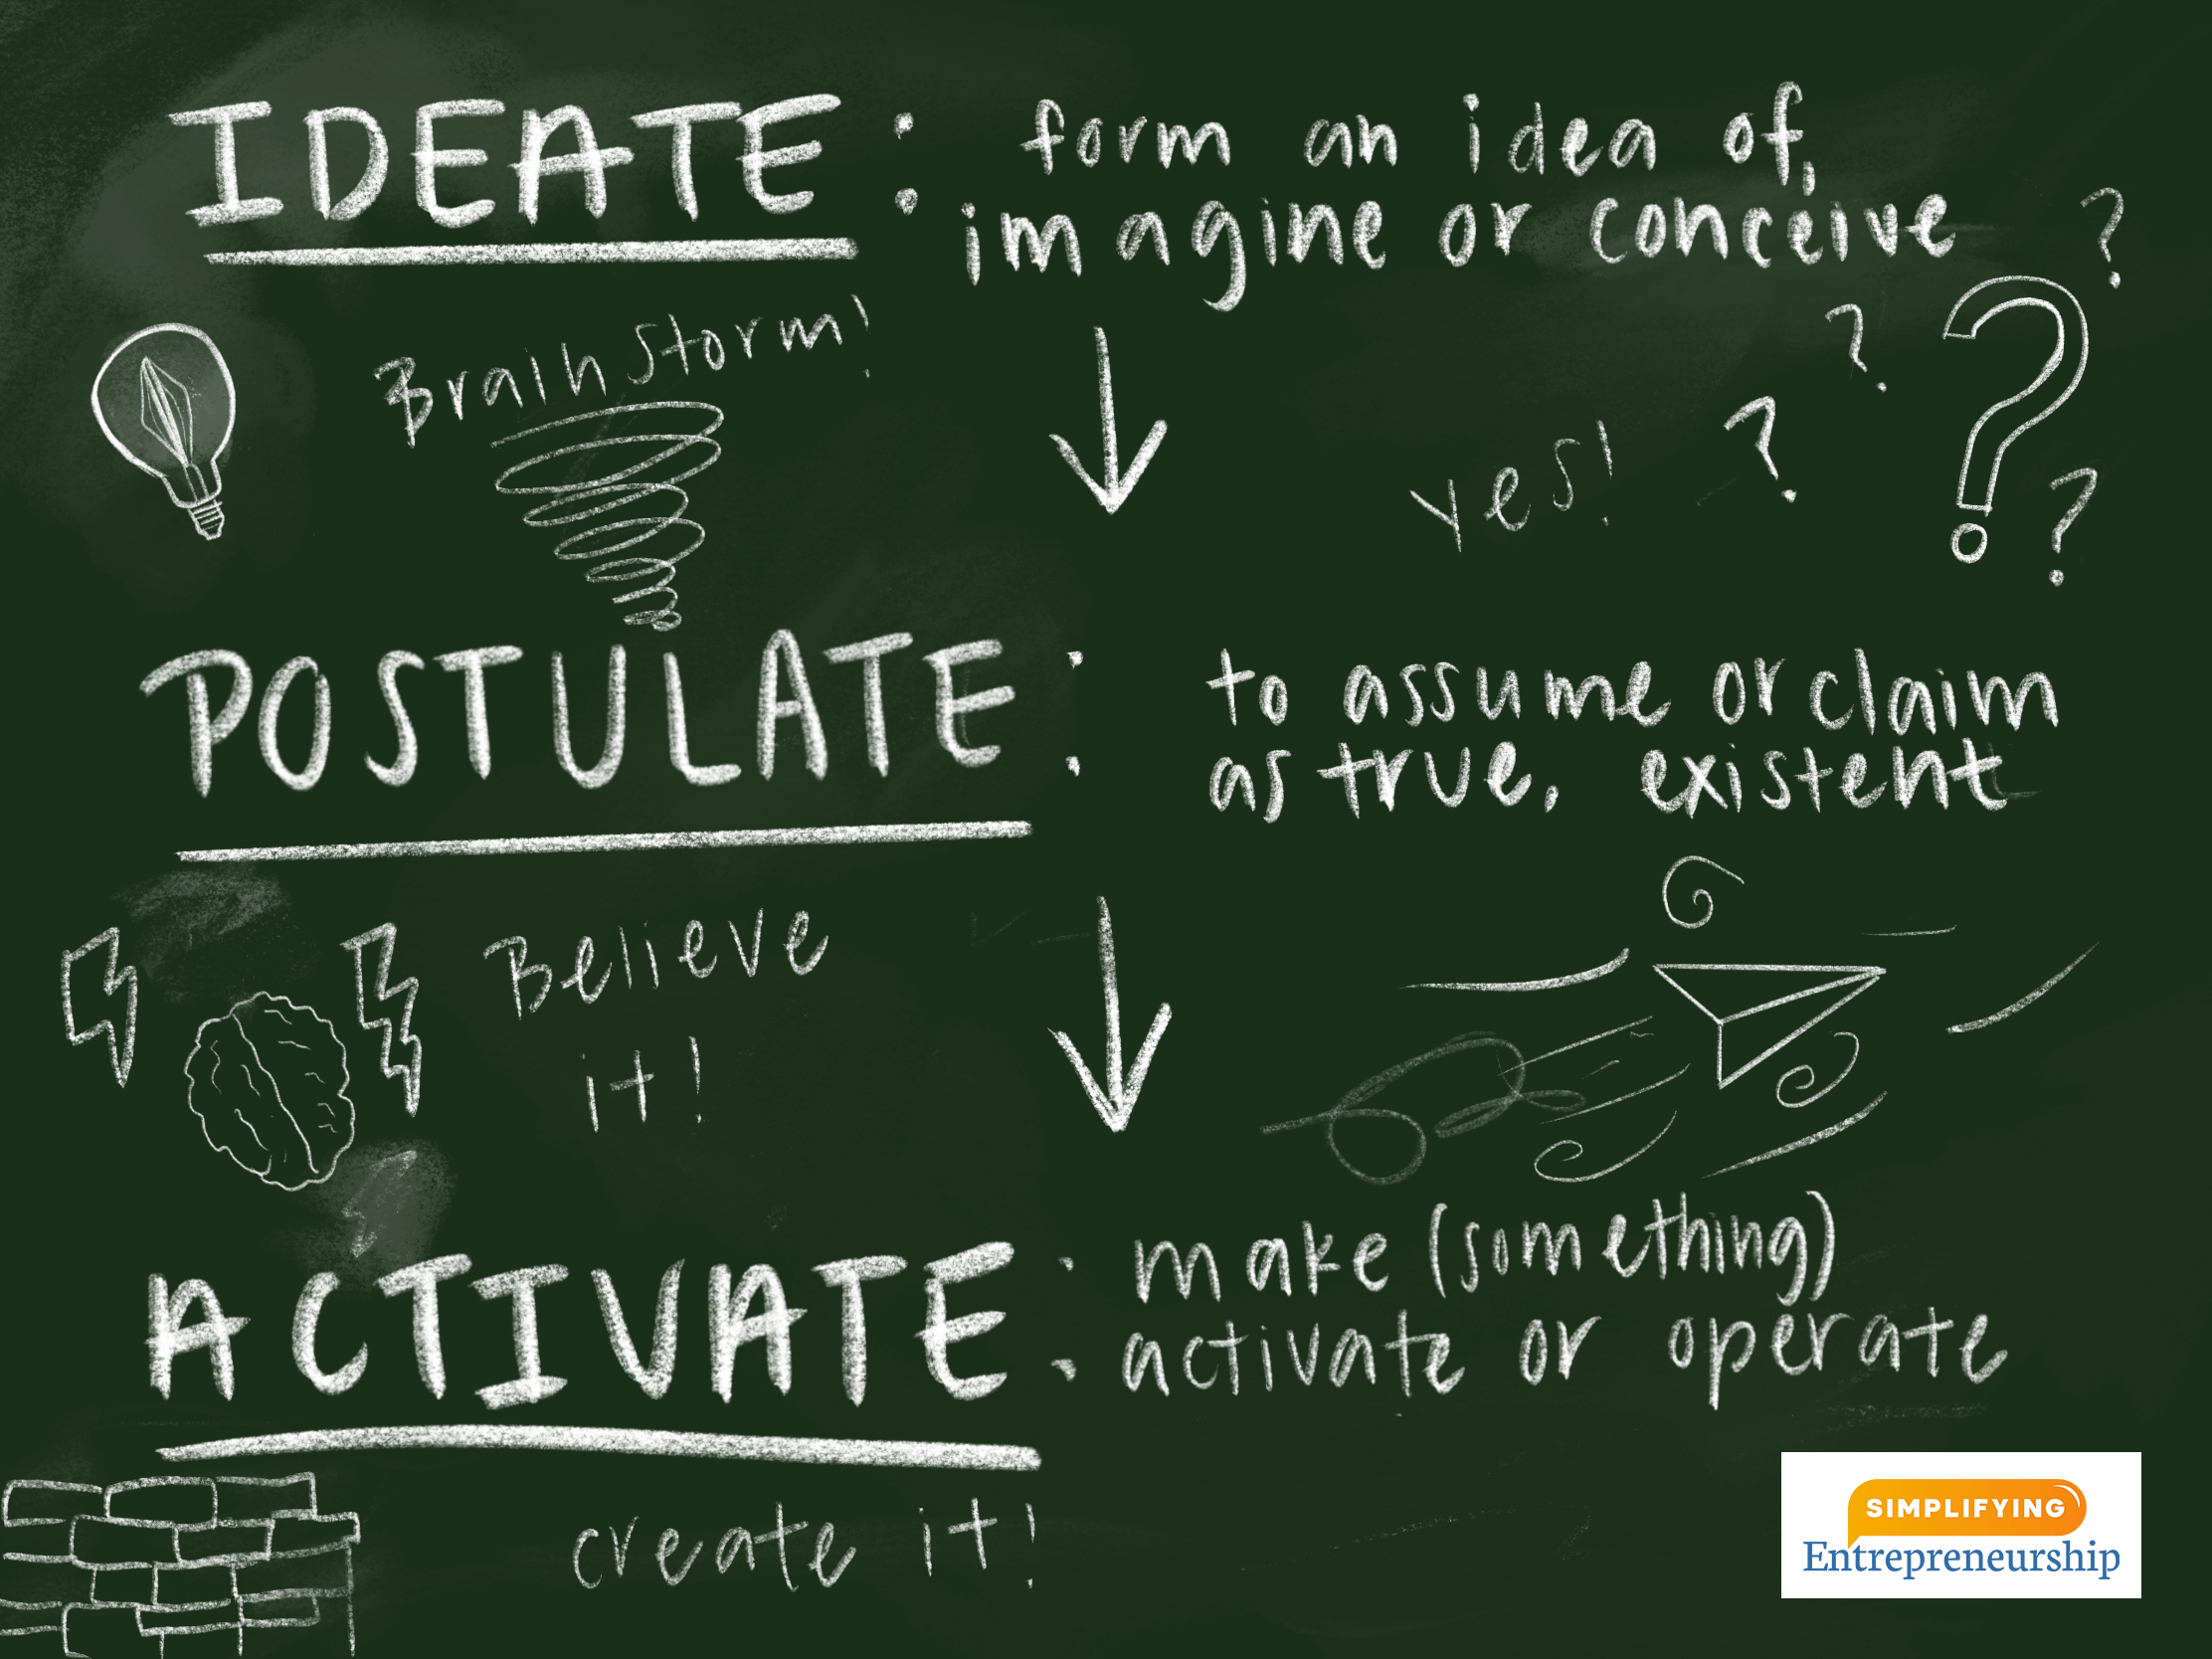 The Entrepreneurial I.P.A. — Ideate, Postulate, Activate!